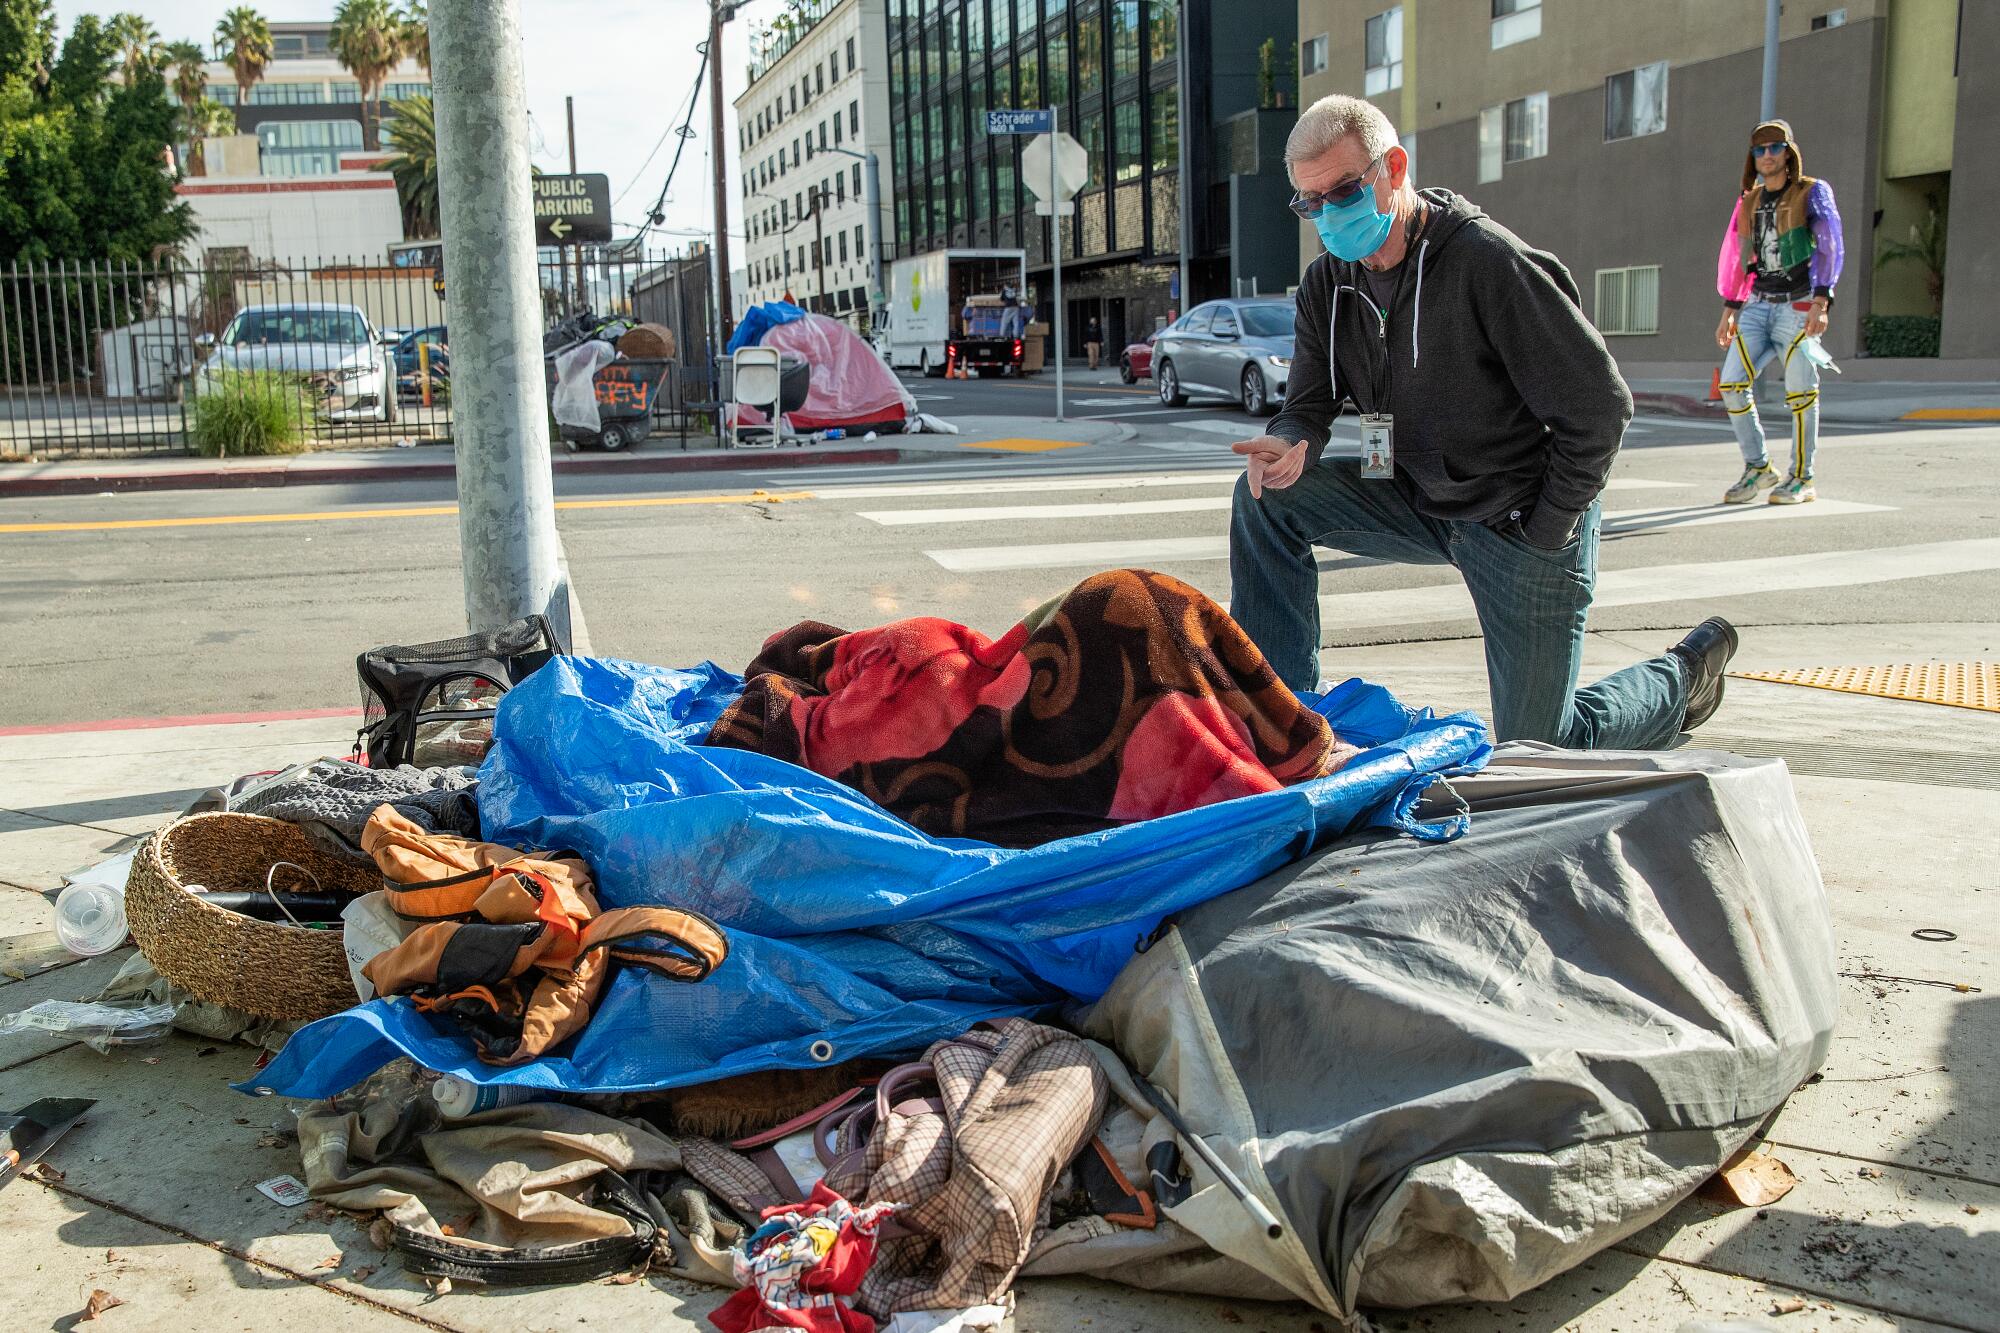 Jason Sodenkamp talks to a homeless client on a sidewalk in Hollywood.